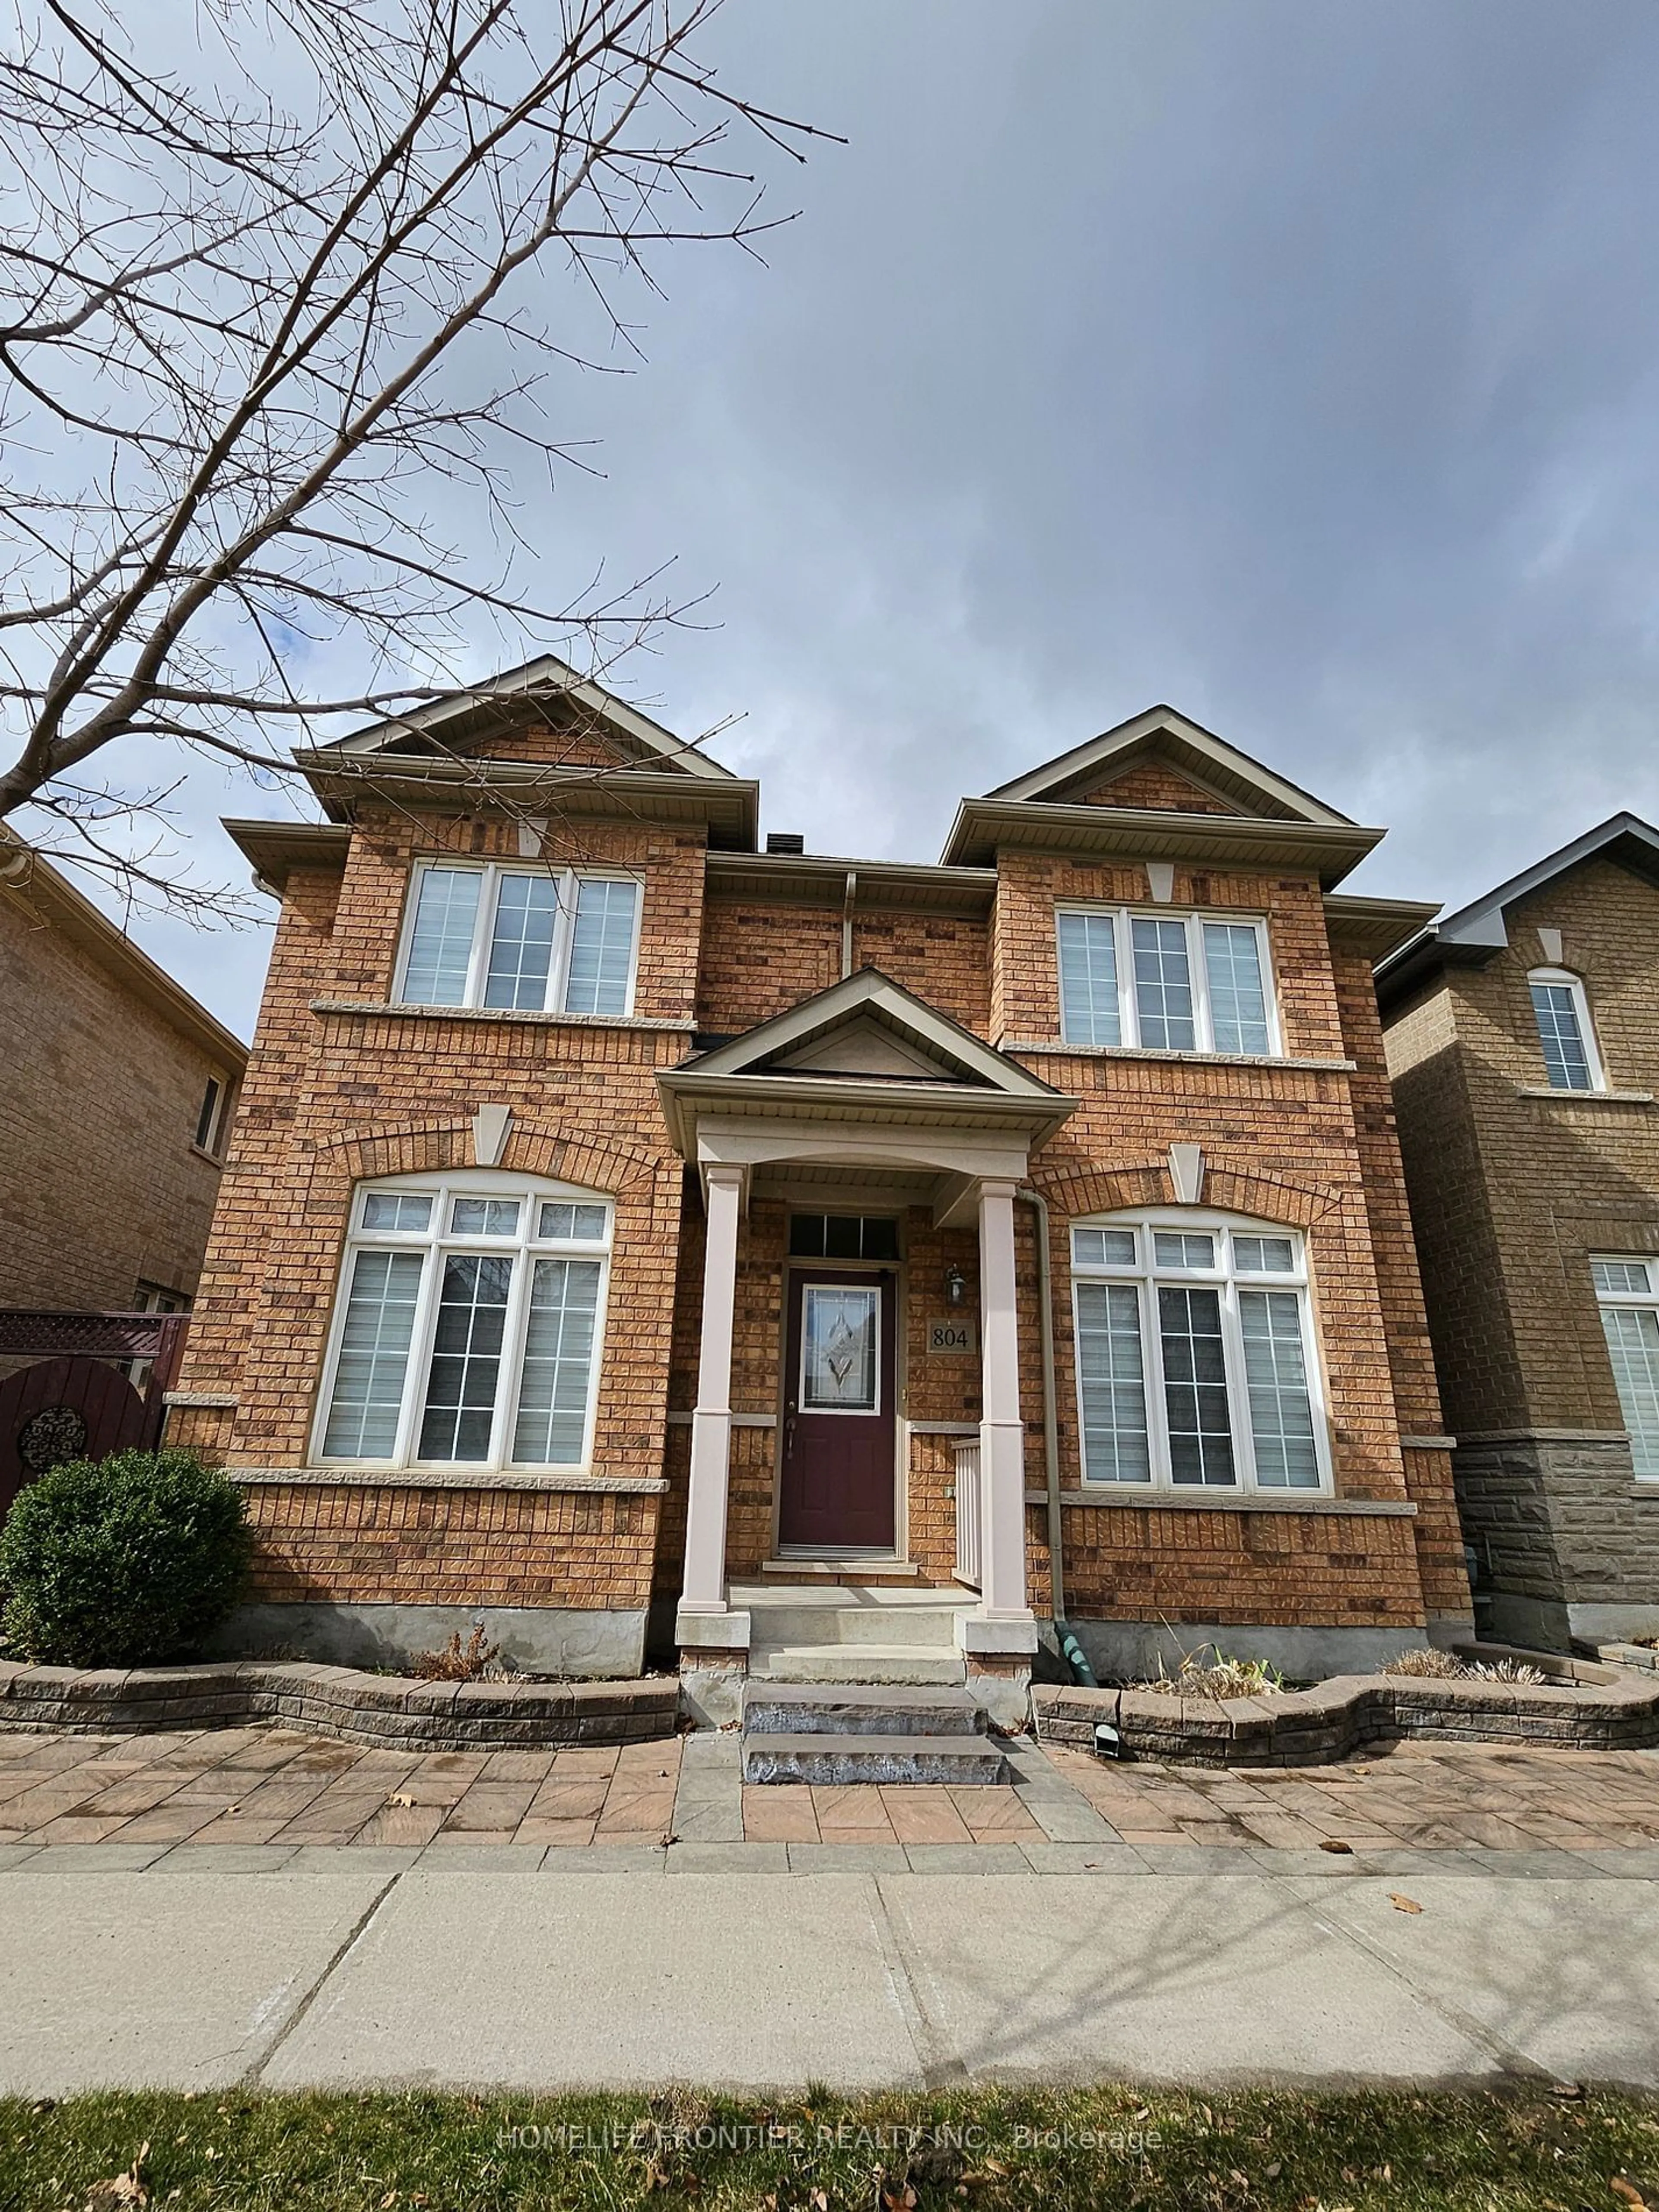 Home with brick exterior material for 804 Cornell Rouge Blvd, Markham Ontario L6B 0K6